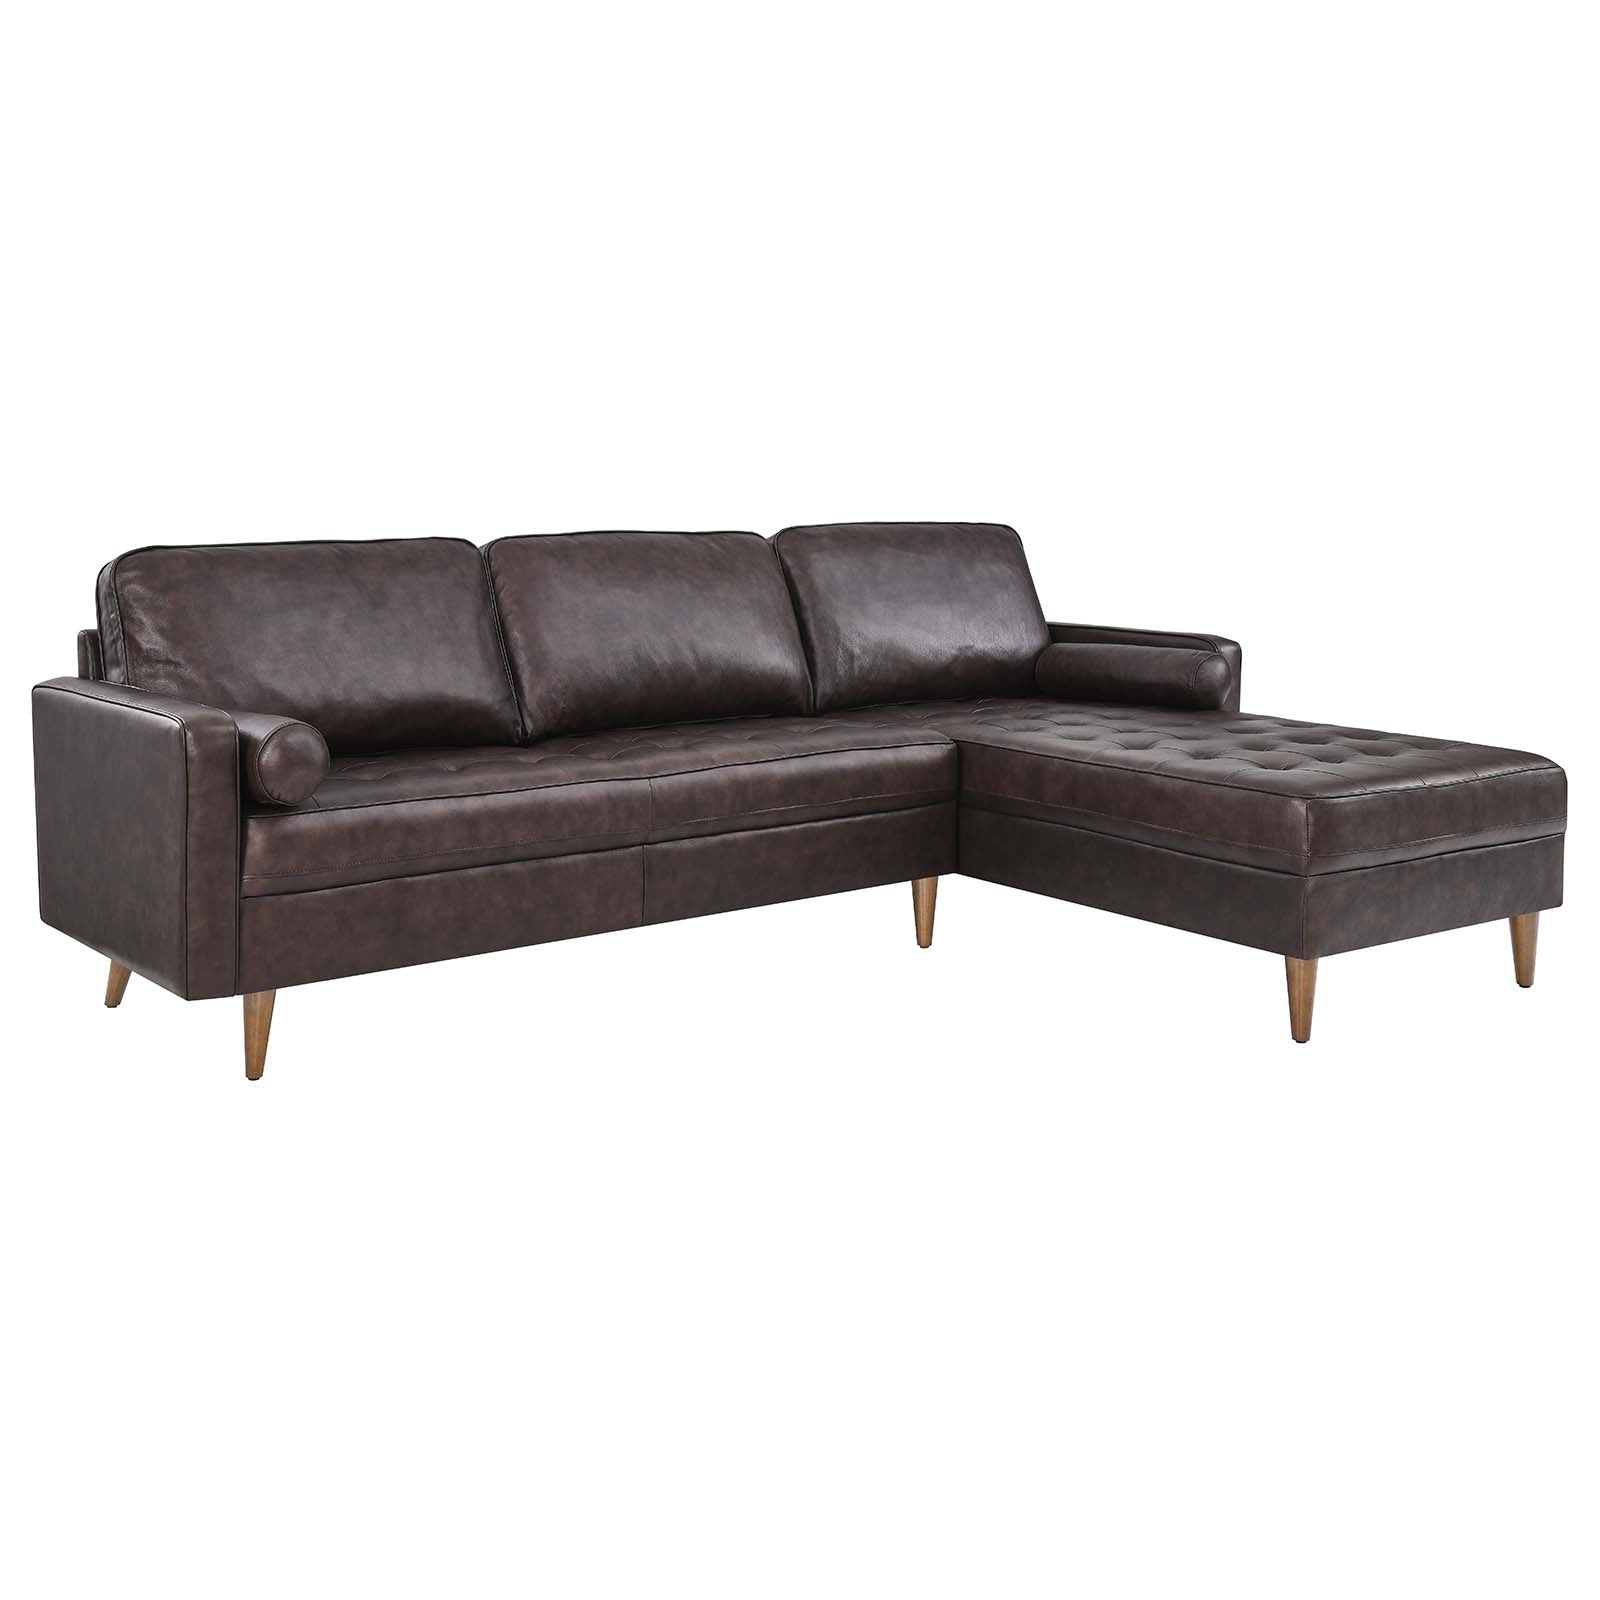 Valour 98" Leather Sectional Sofa - East Shore Modern Home Furnishings